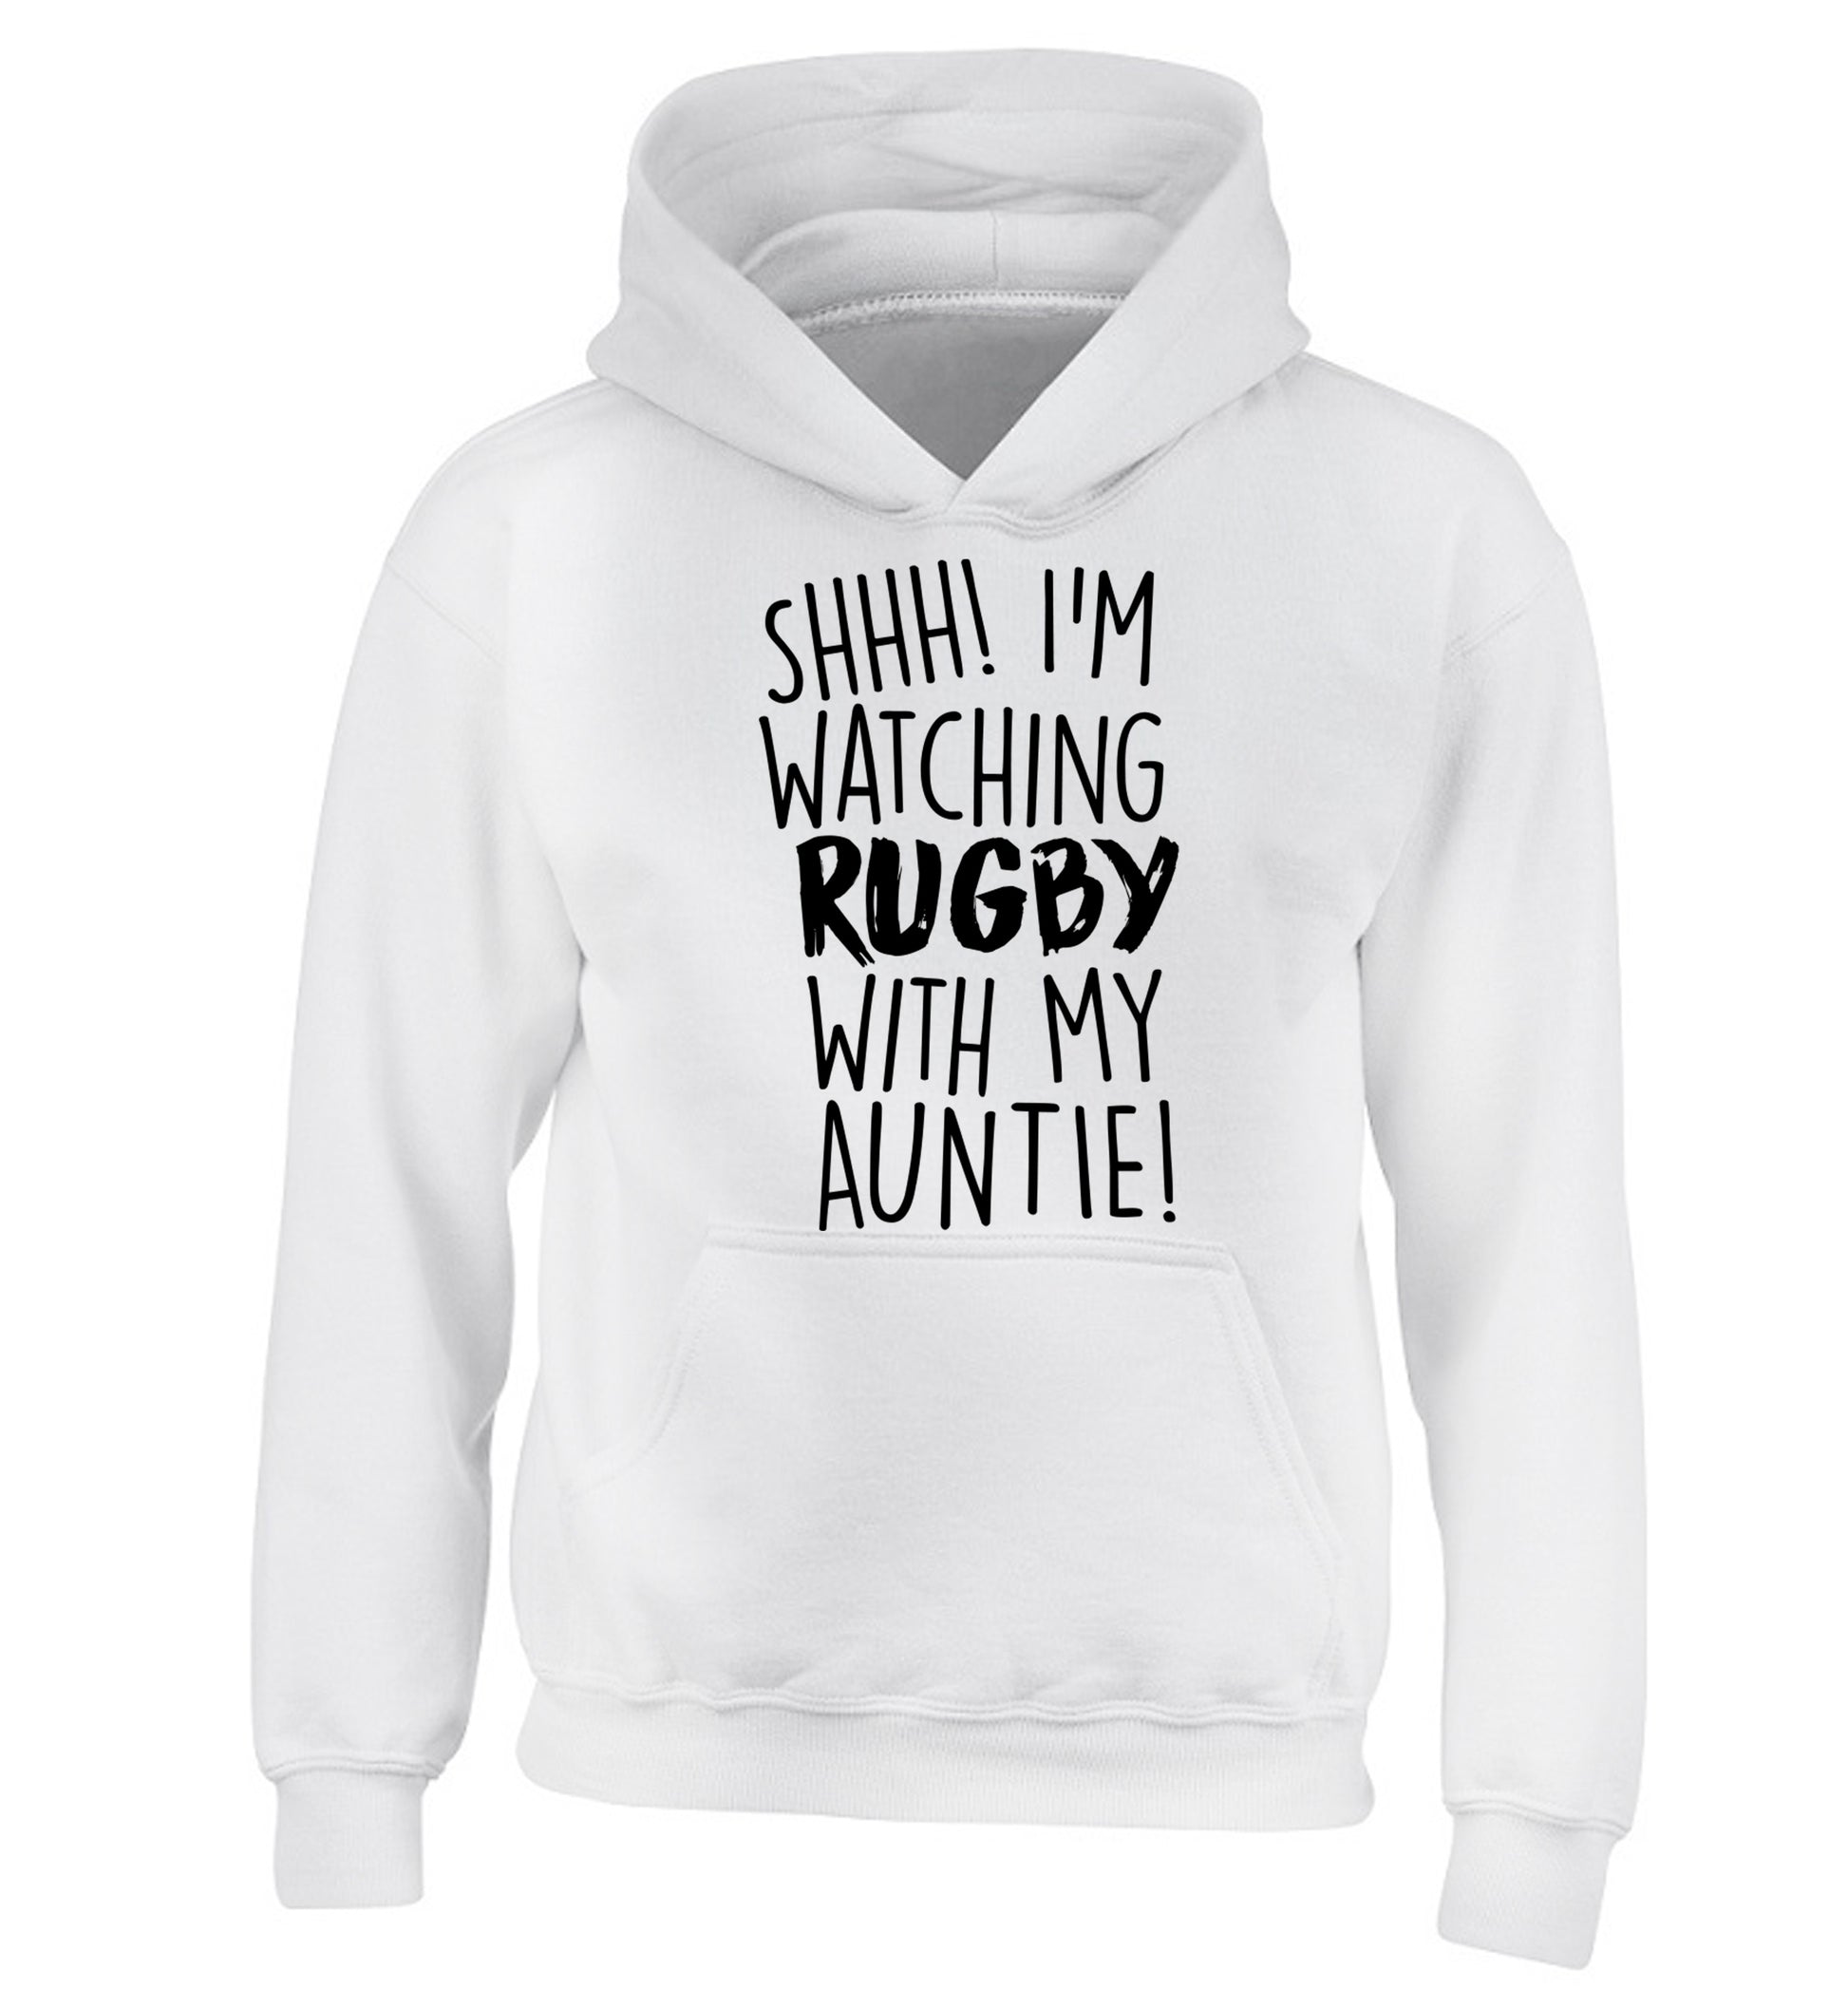 Shhh I'm watchin rugby with my auntie children's white hoodie 12-13 Years